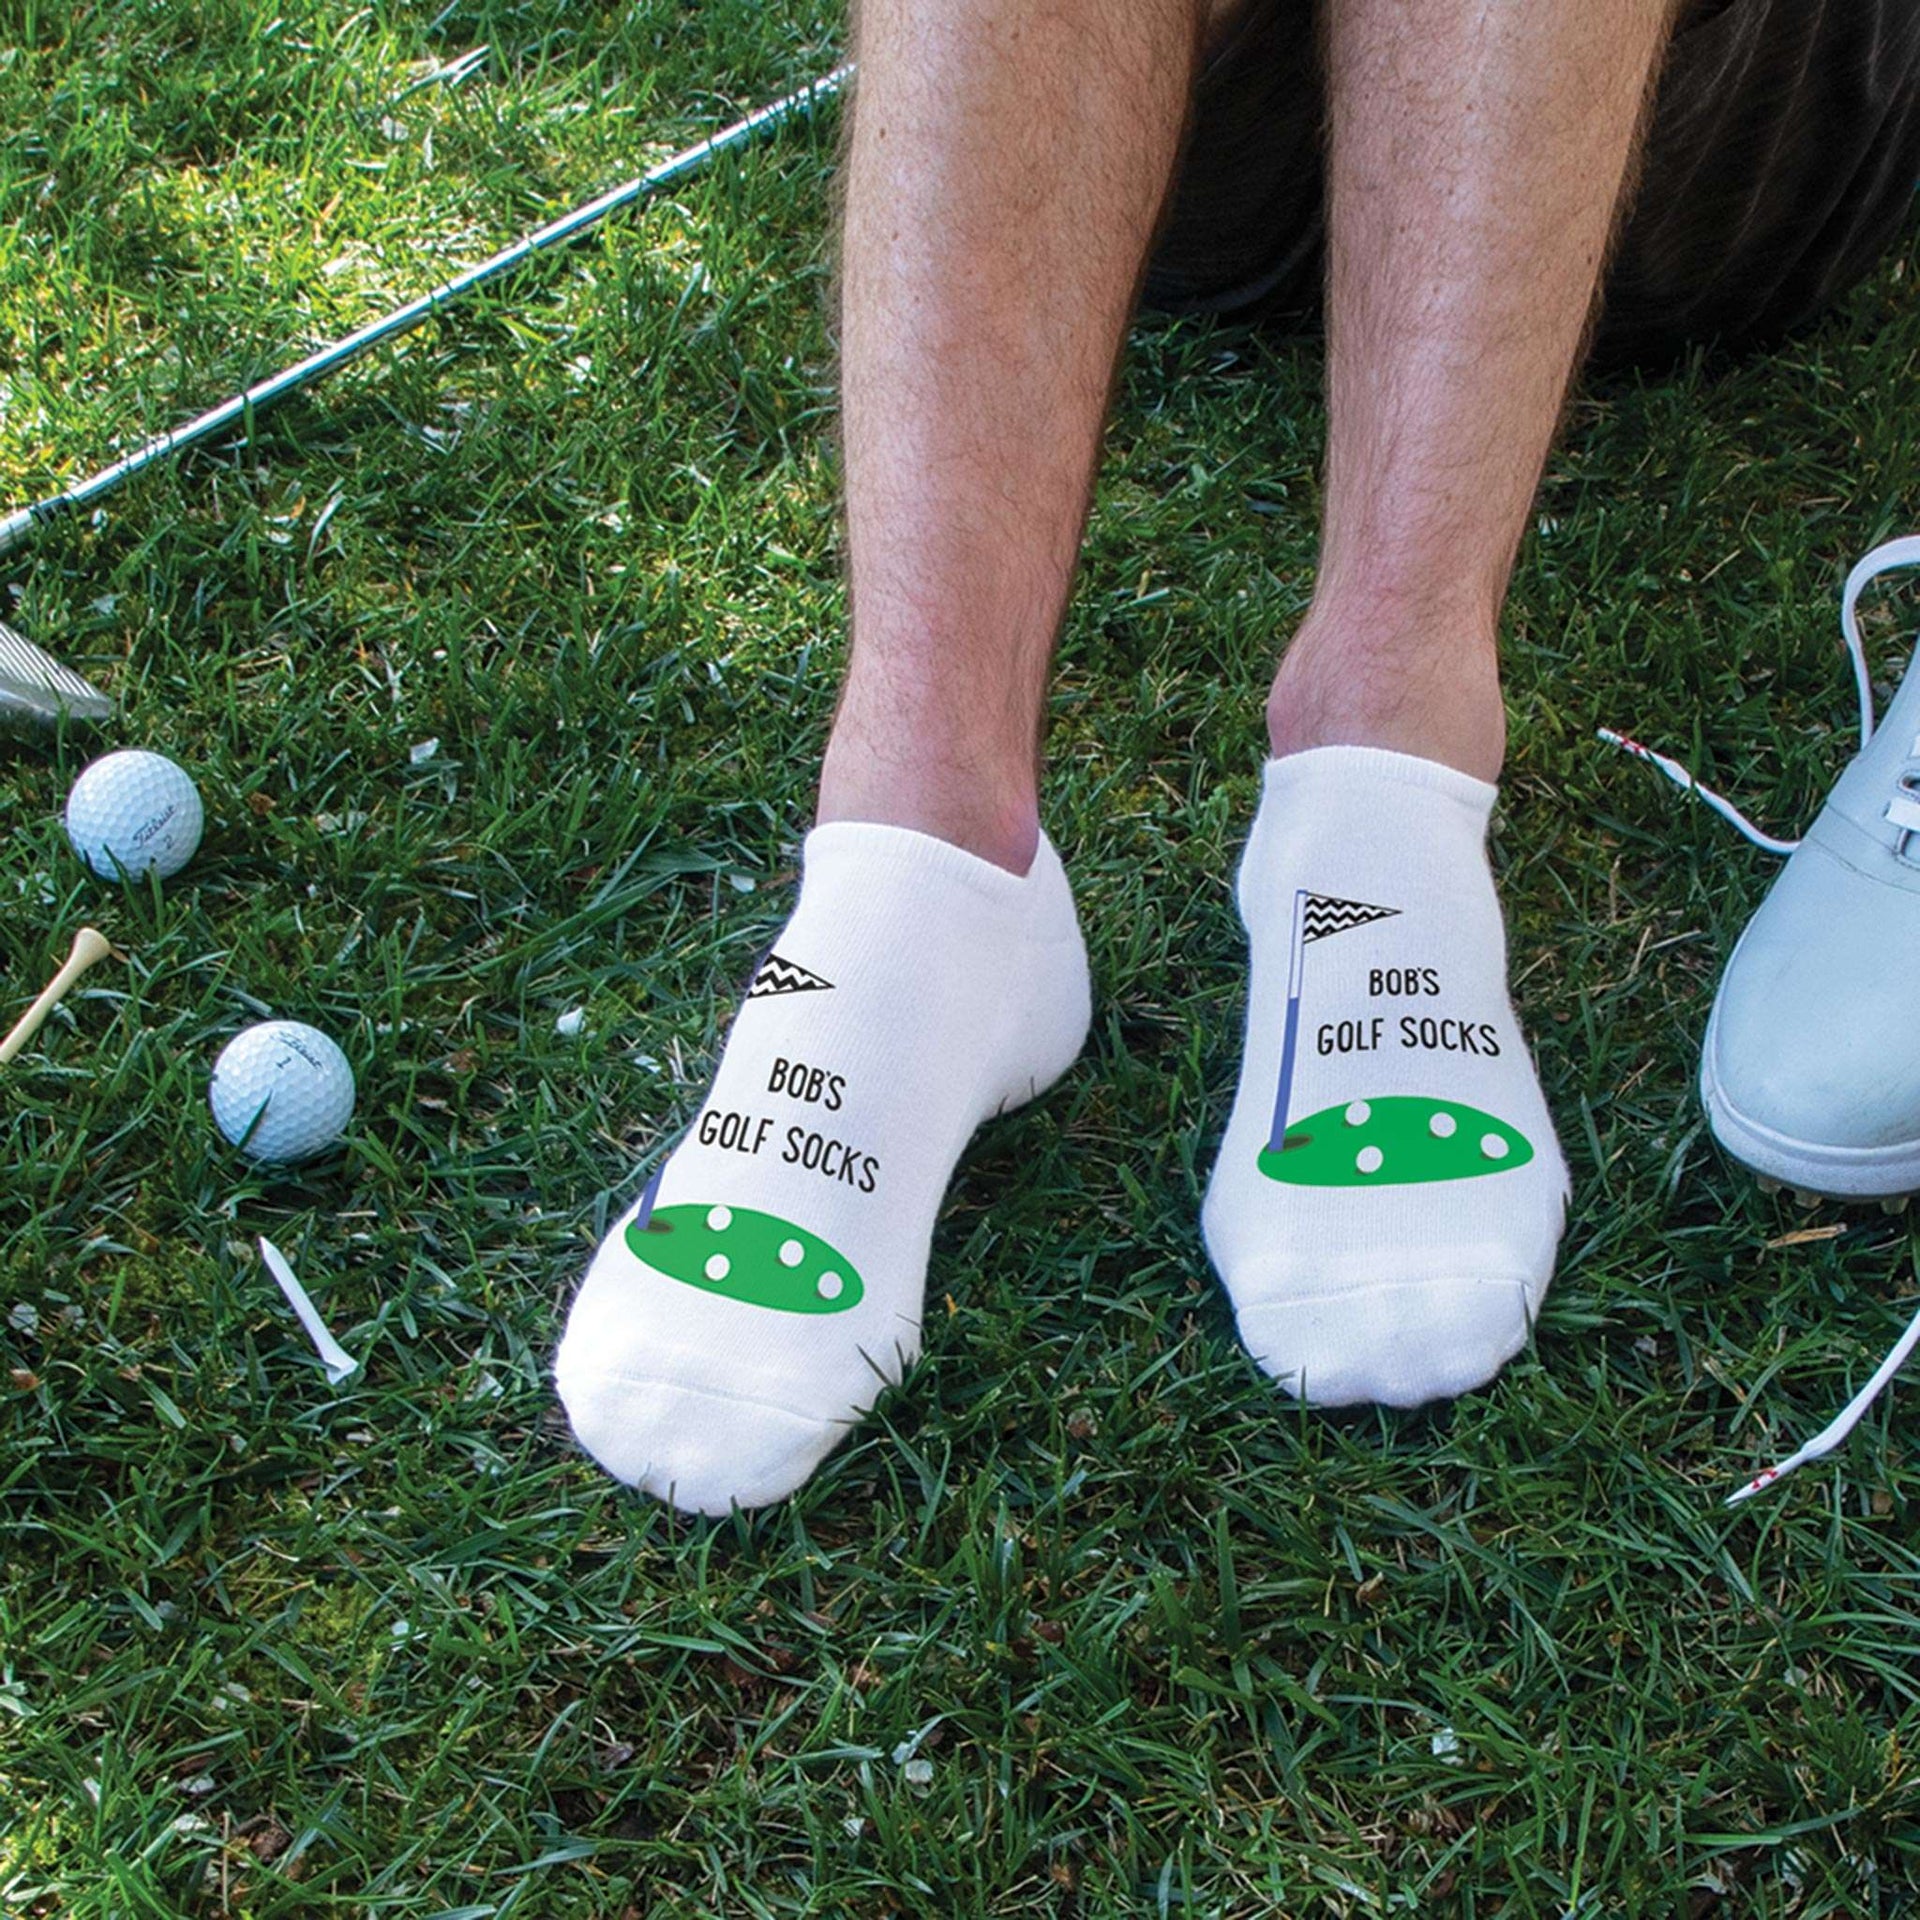 Fun personalized golf socks for men with your name sold in a three pair gift box set.